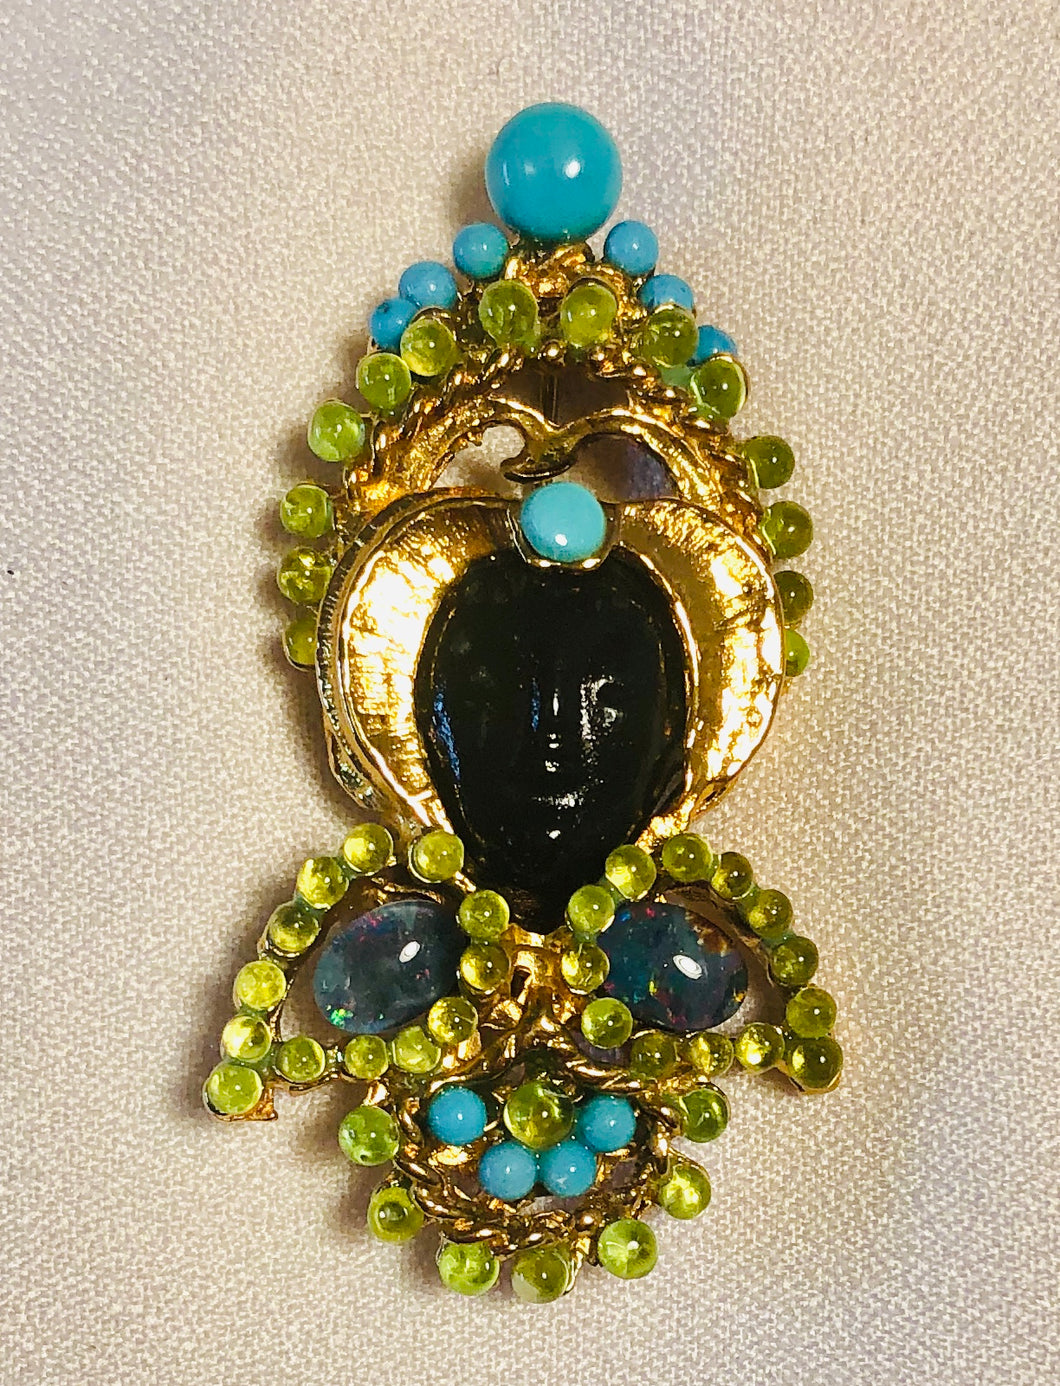 Peridot, Turquoise and Blue Opal Brooch